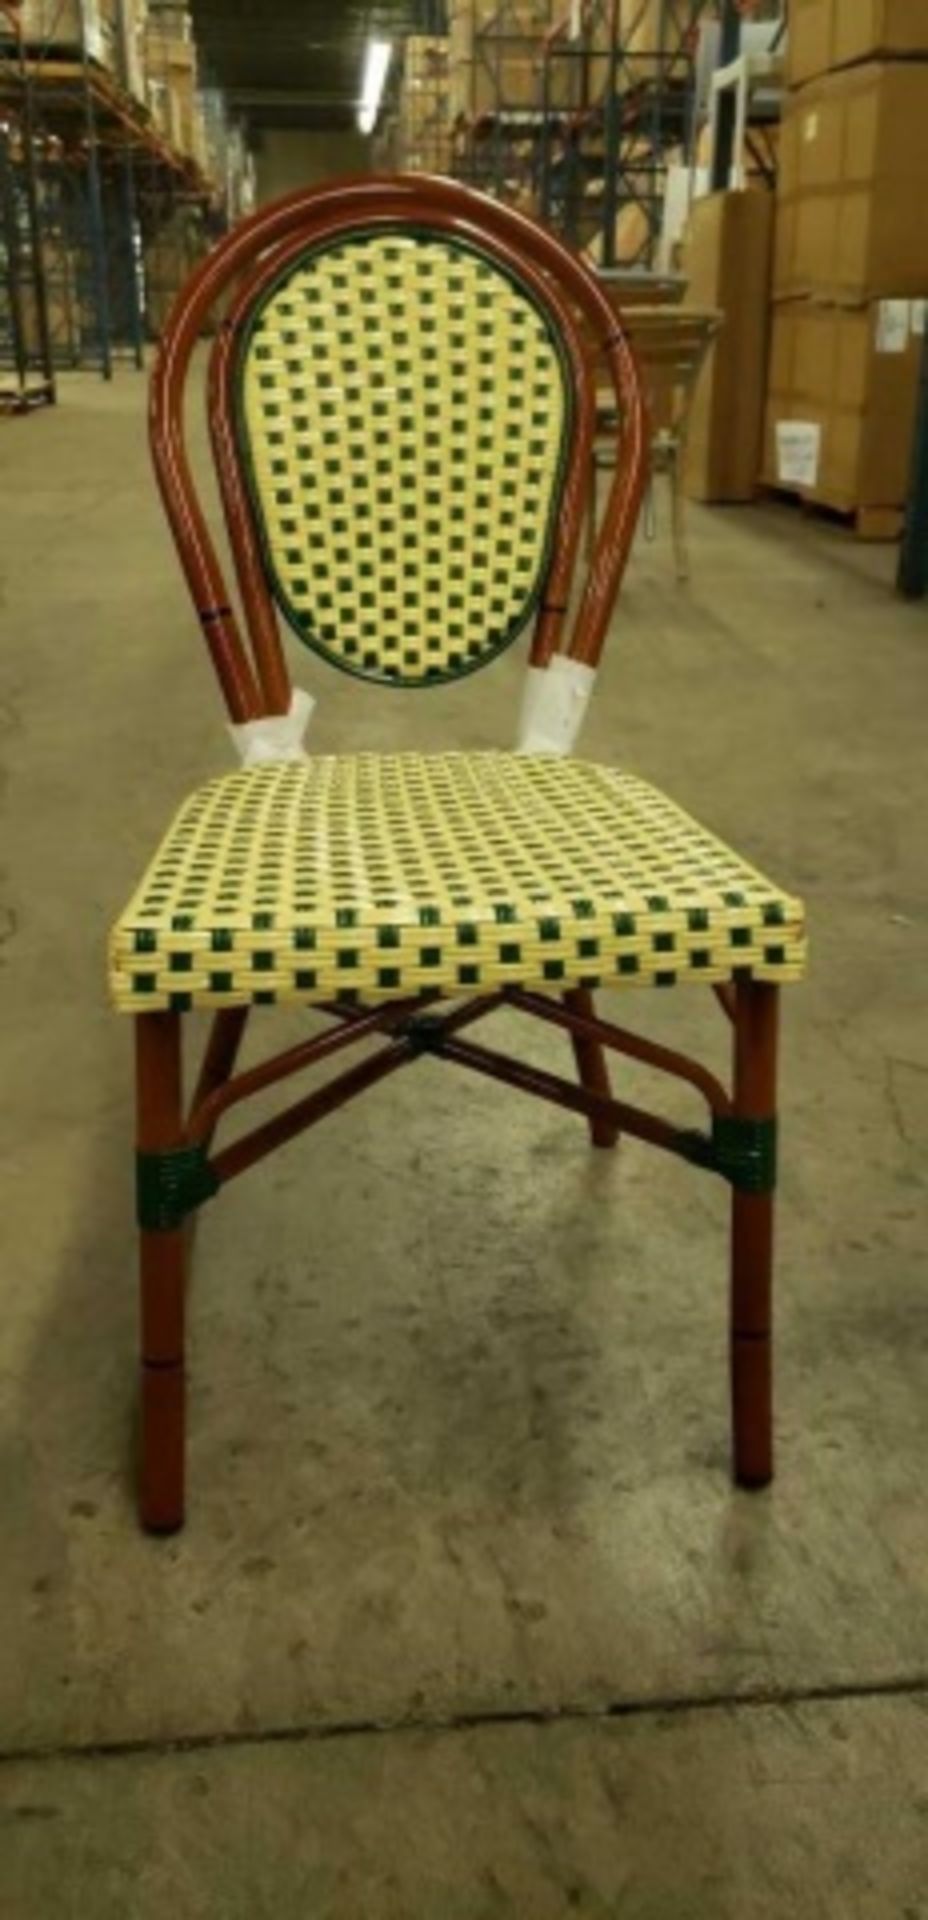 Parisienne Side Chair - Ivory/Green, A57-SC IG. PE Weave on Tubular Aluminum Frame/Powder coat - Image 3 of 7